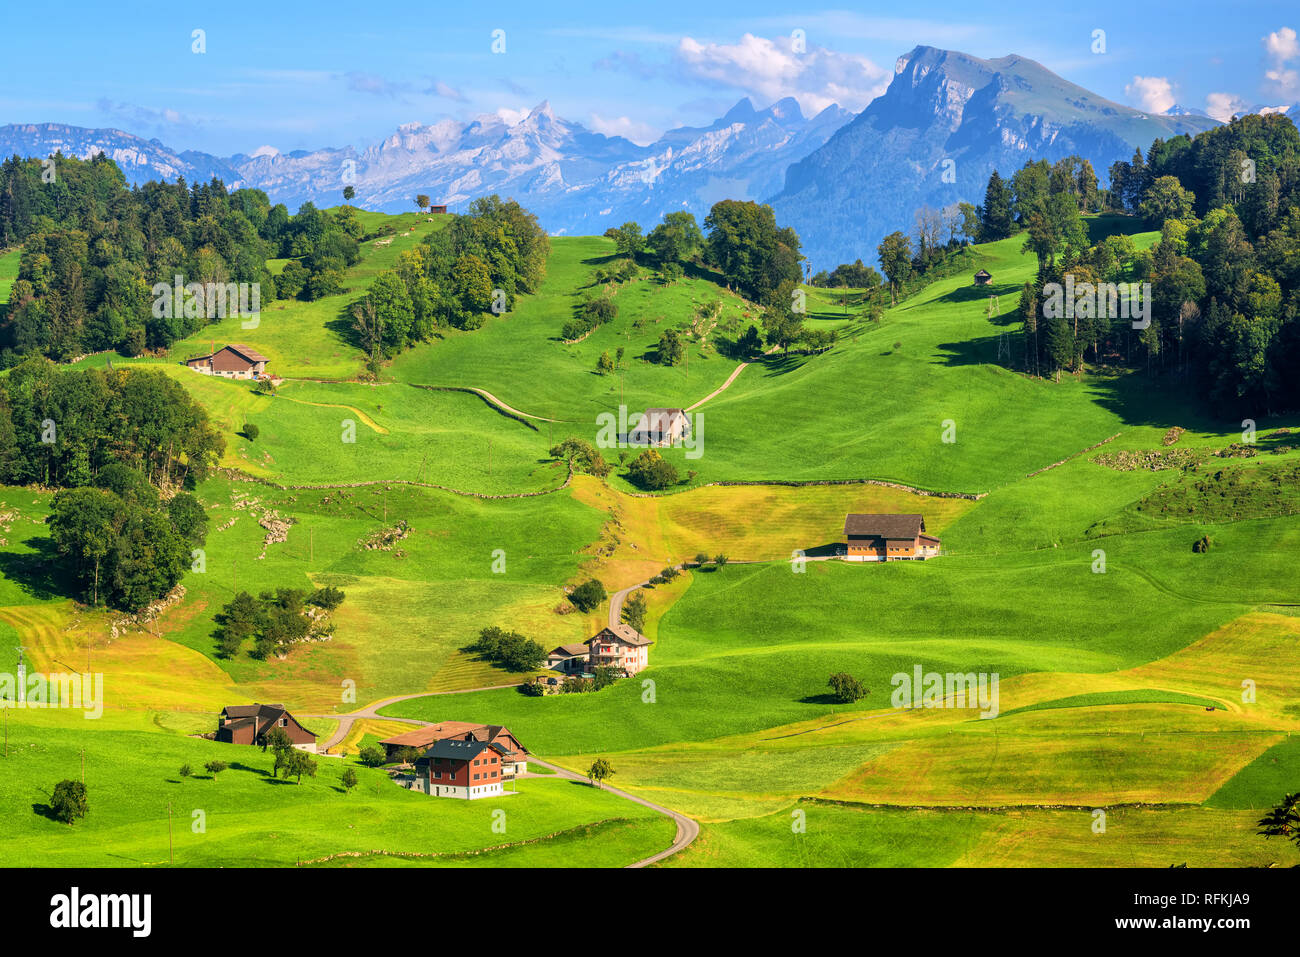 Idyllic swiss rural landscape with green meadows and Alps mountain peaks, canton Lucerne, Switzerland Stock Photo